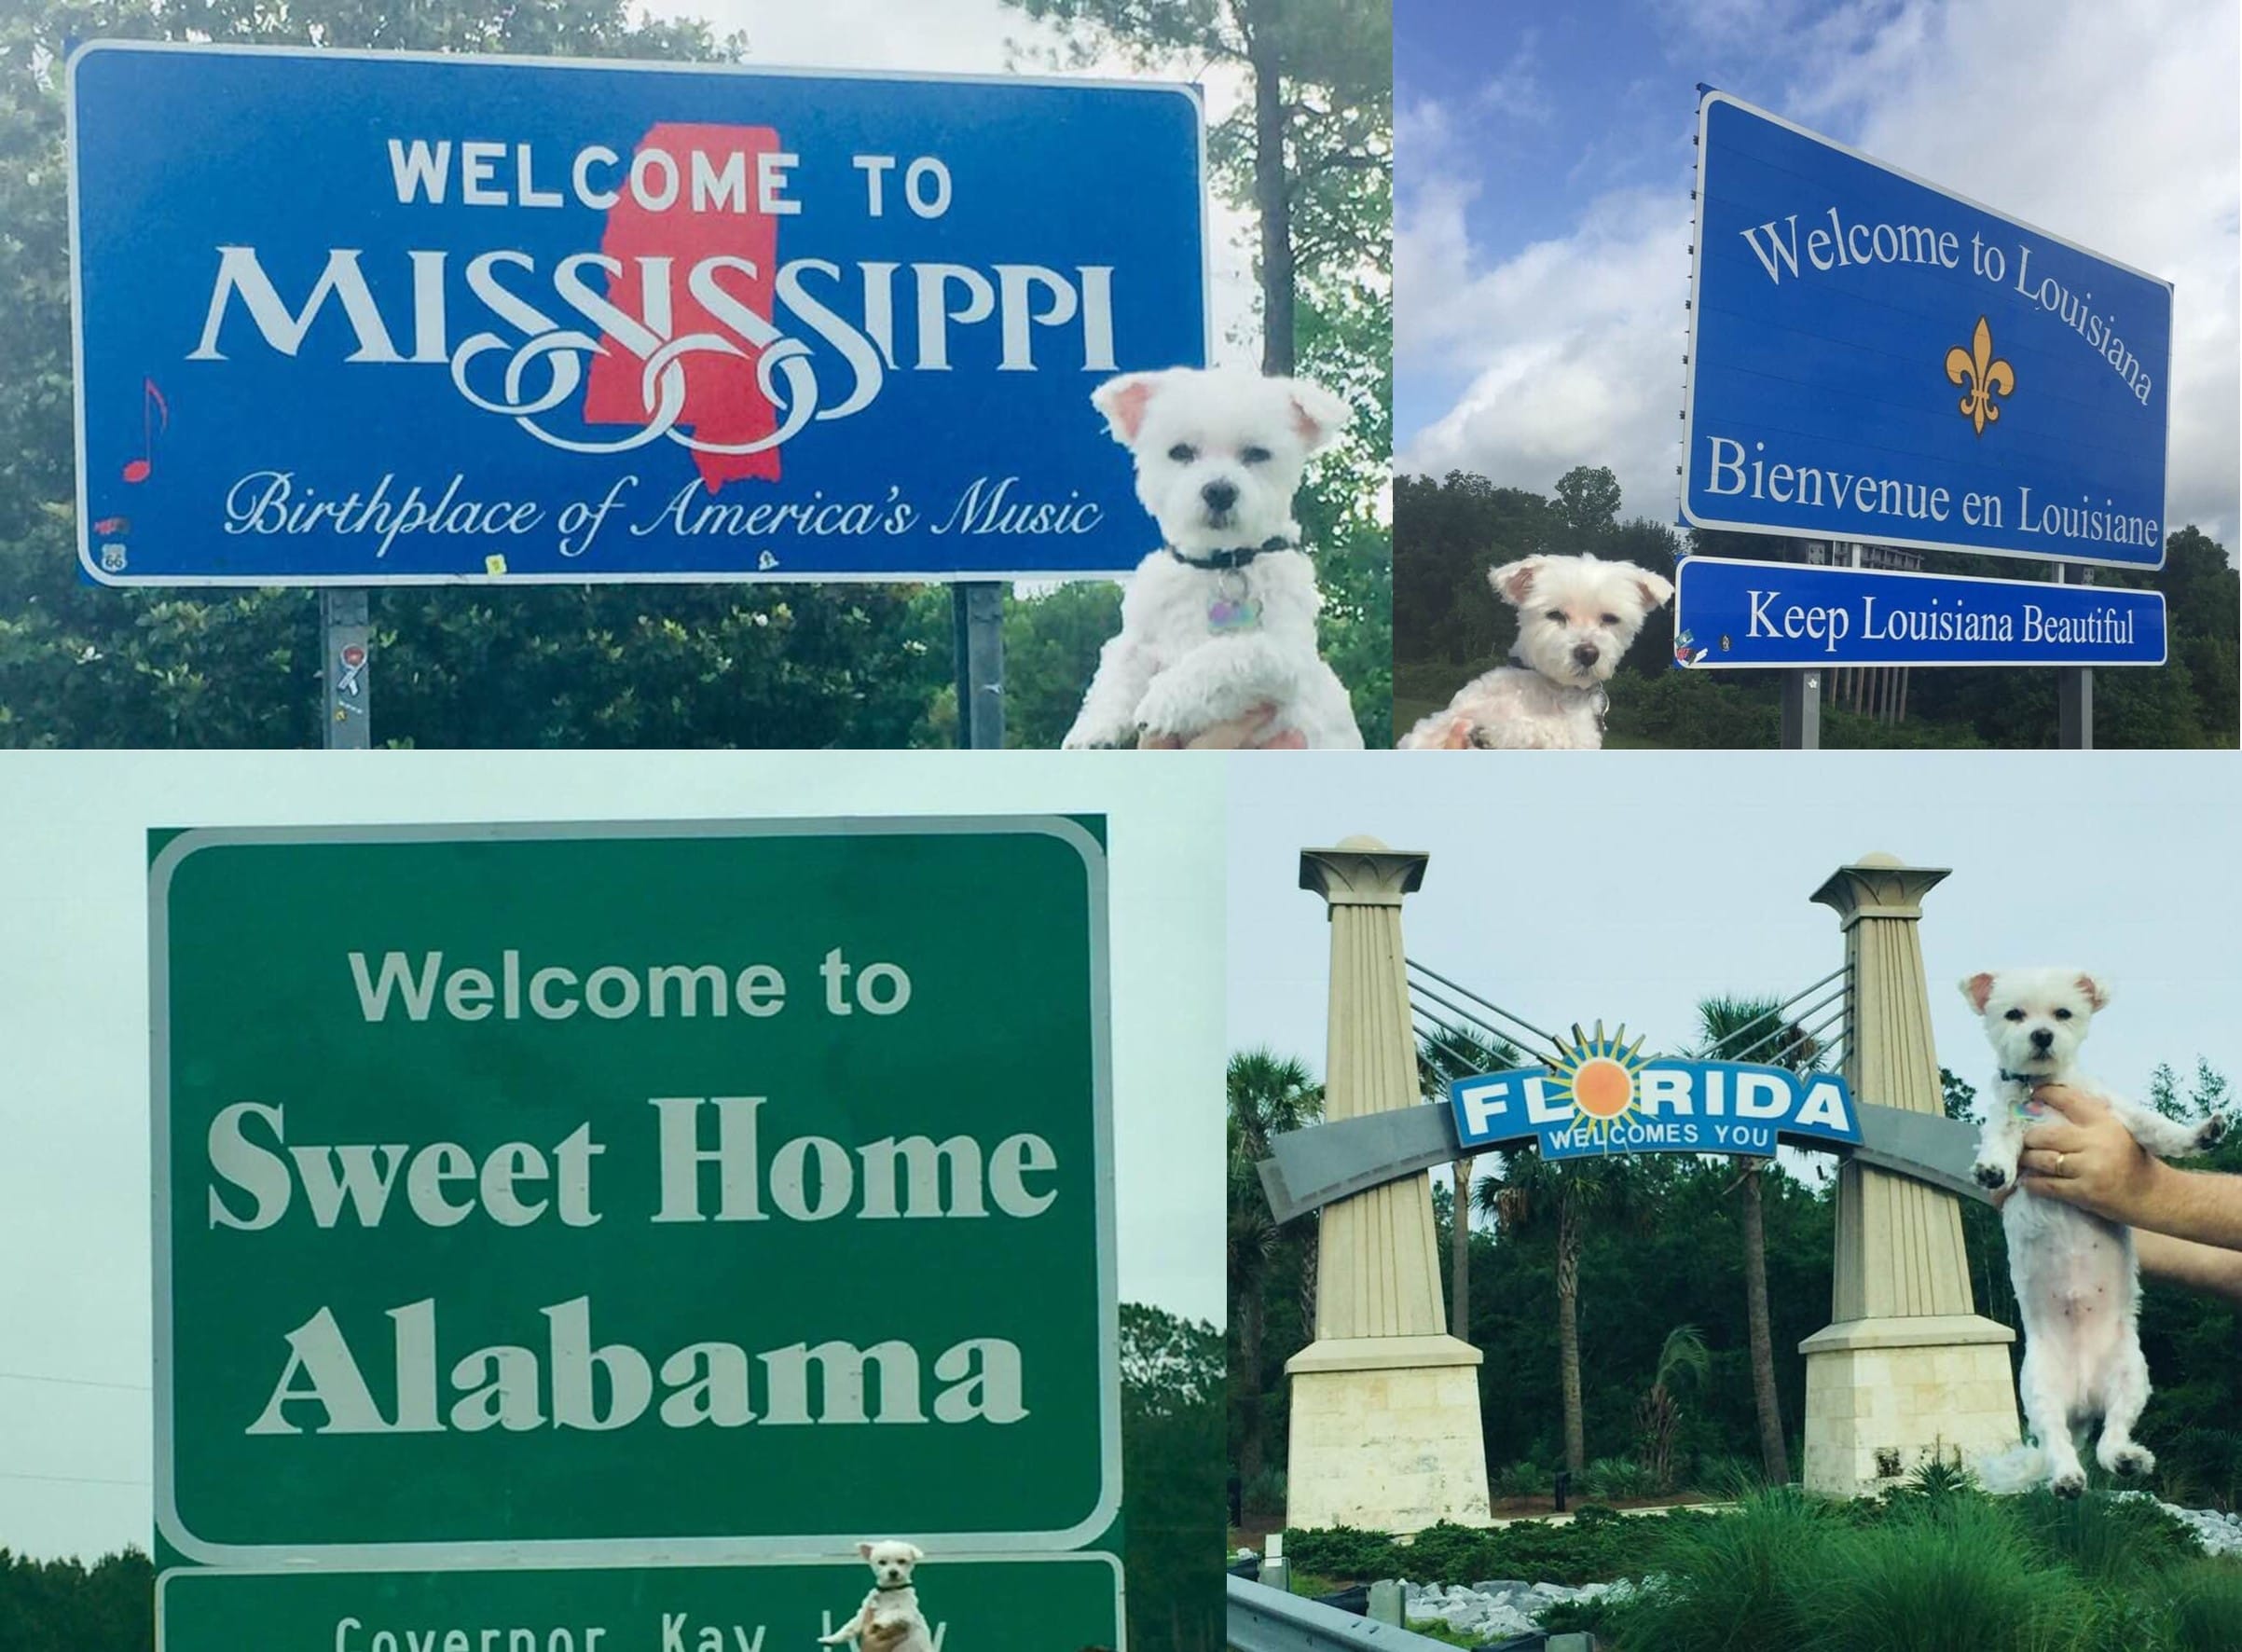 4 photos of a small white dog being held up by state signs of Mississippi, Louisiana, Alabama and Florida